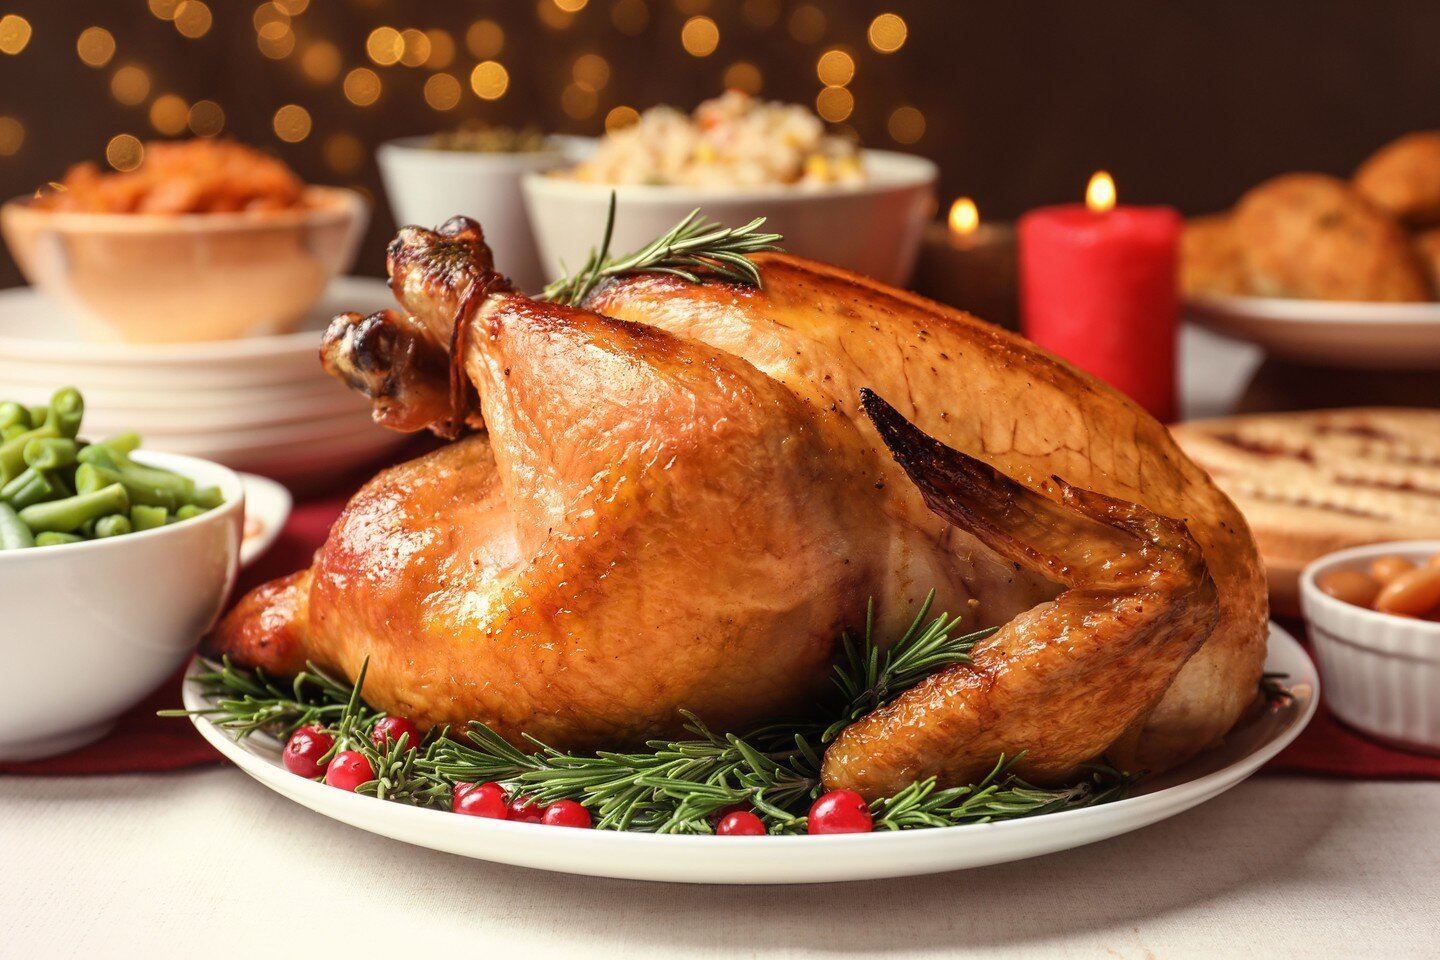 This year, avoid the chaos of the supermarket and #shoplocal at Nassau Street Seafood! We have a variety of #fresh, #allnatural Amish Country Turkeys for sale, that you can pre-order through our website or by giving us a call.
.
#thanksgiving #turkey